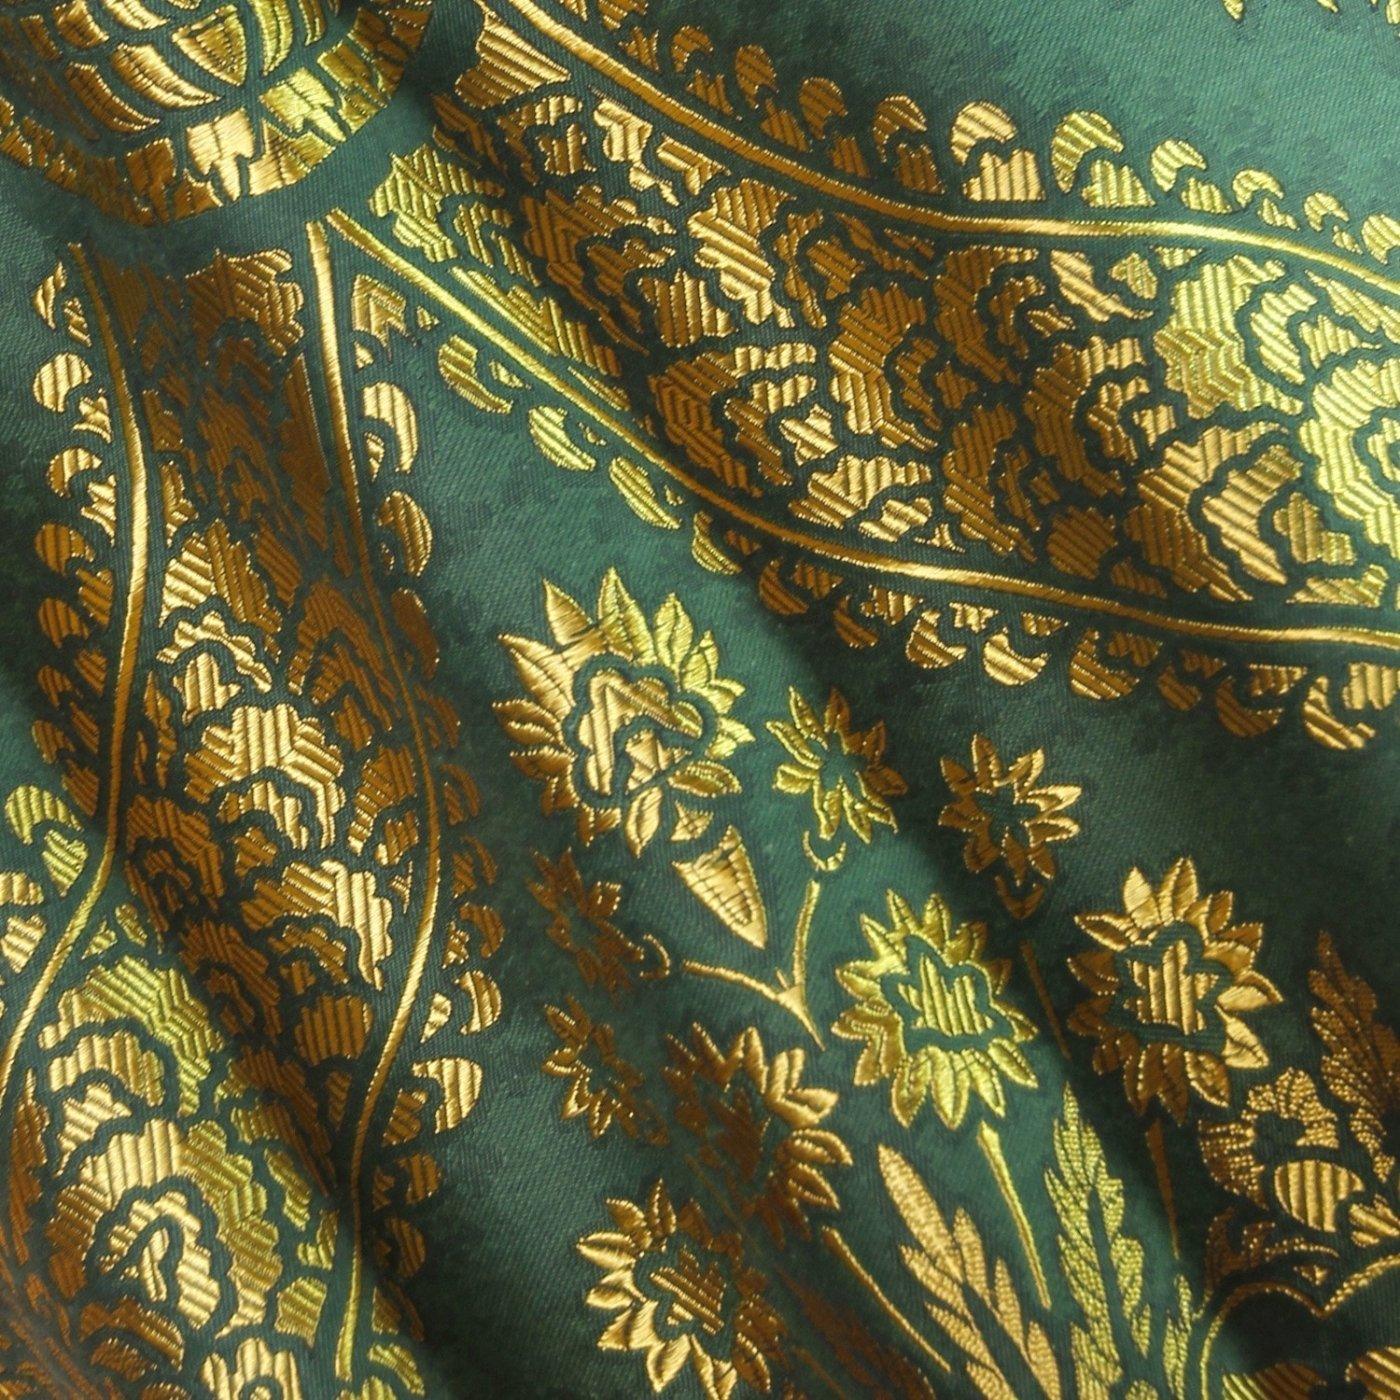 Embroidered Cathedral Cope in Green/Gold Memlinc with Blue Bellini Orphreys - Watts & Co. (international)